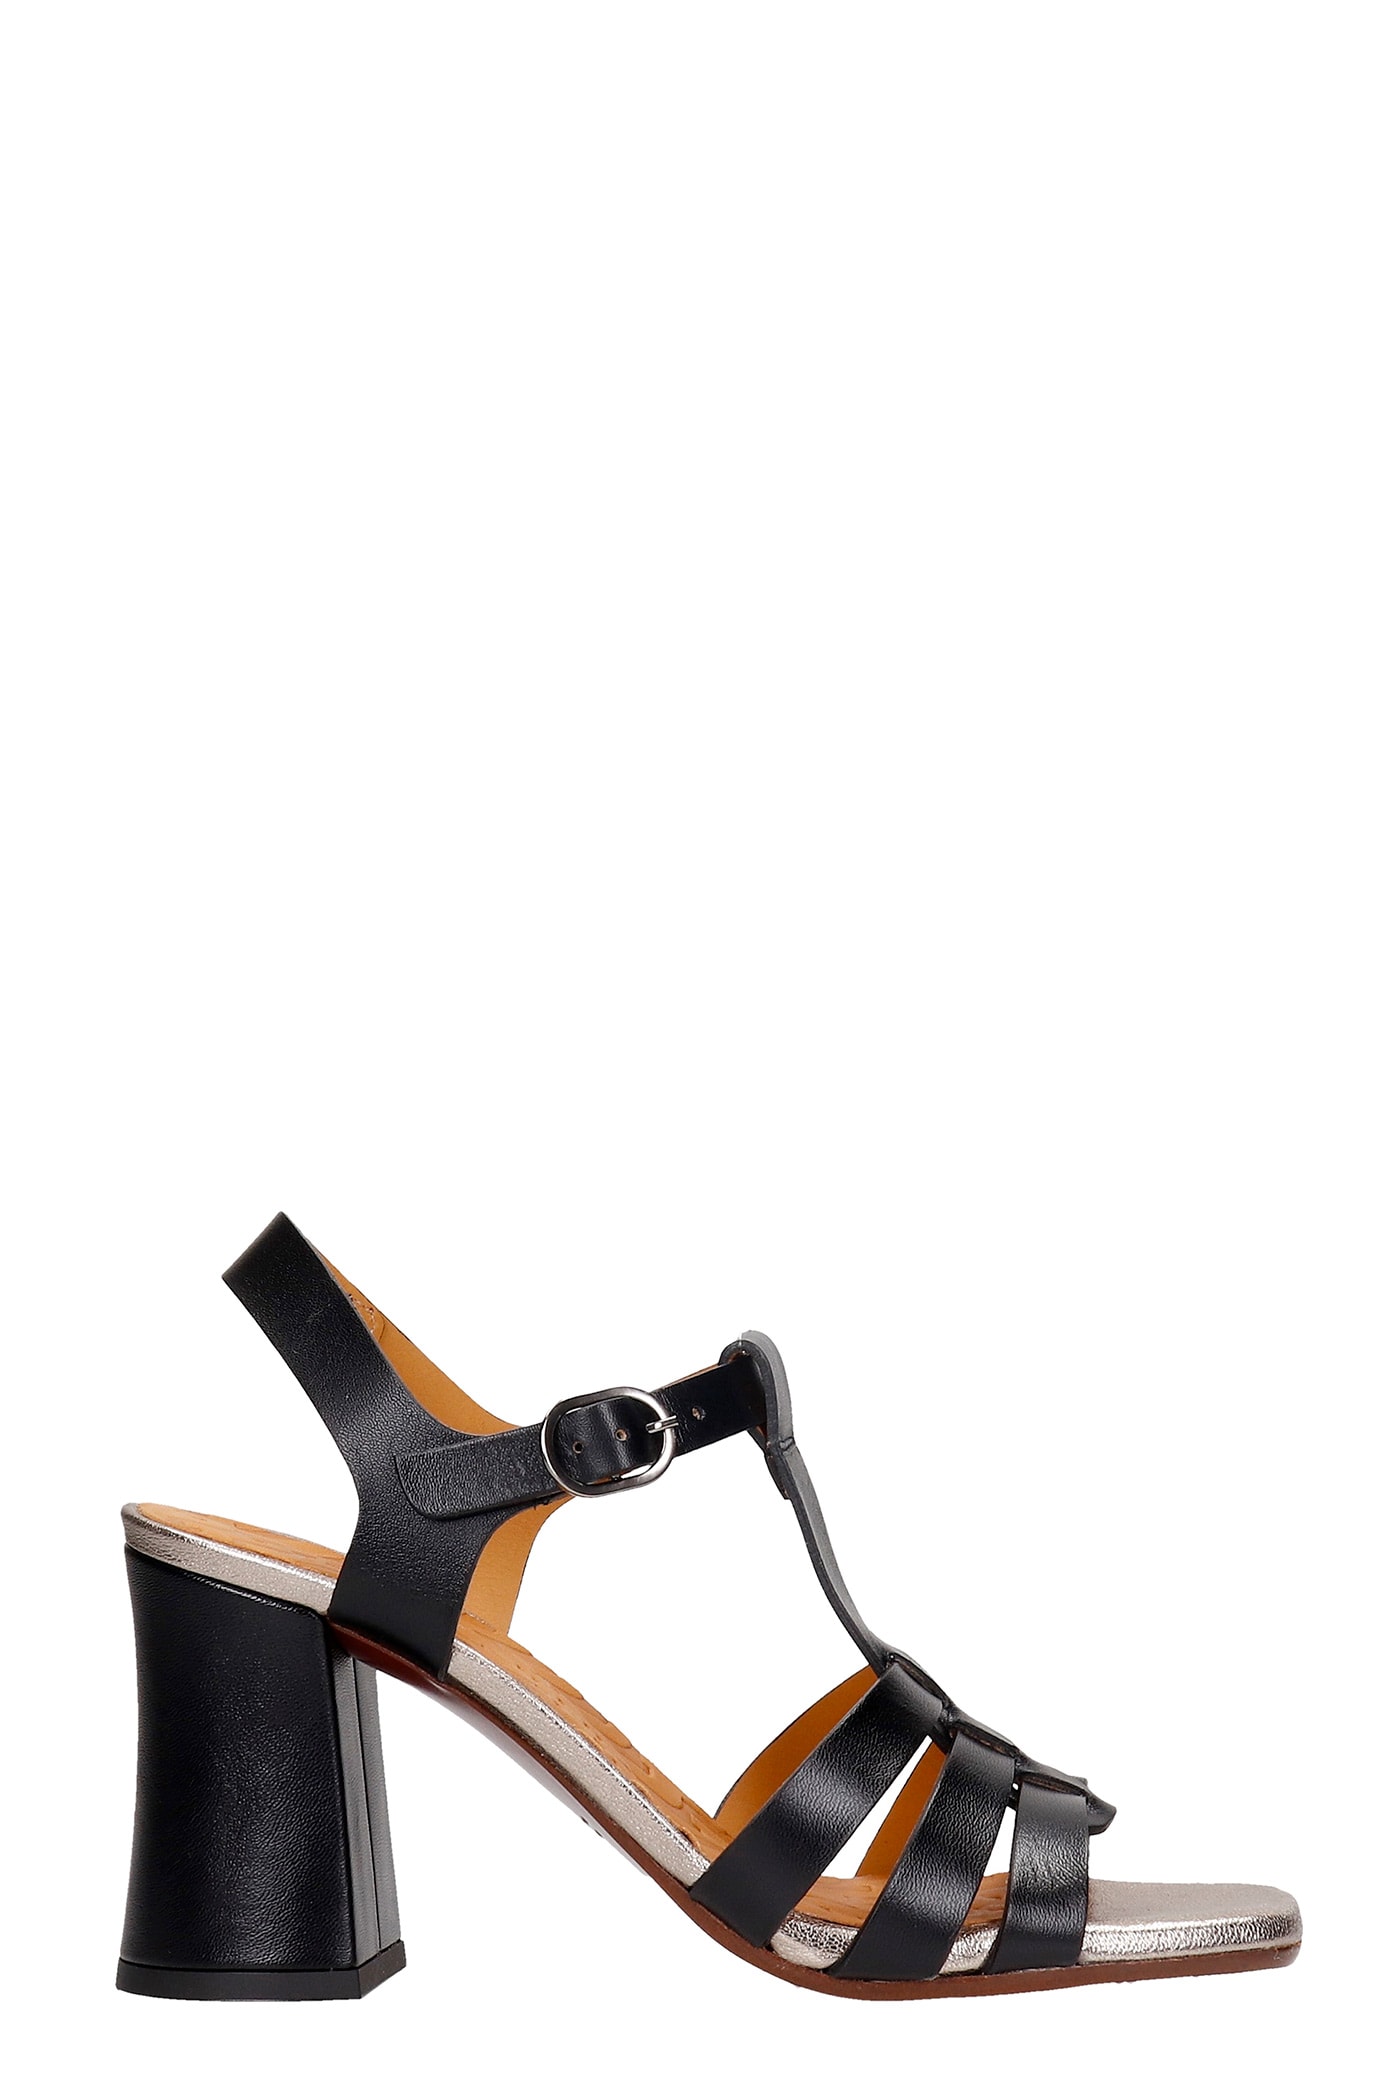 Chie Mihara Paxi Sandals In Black Leather